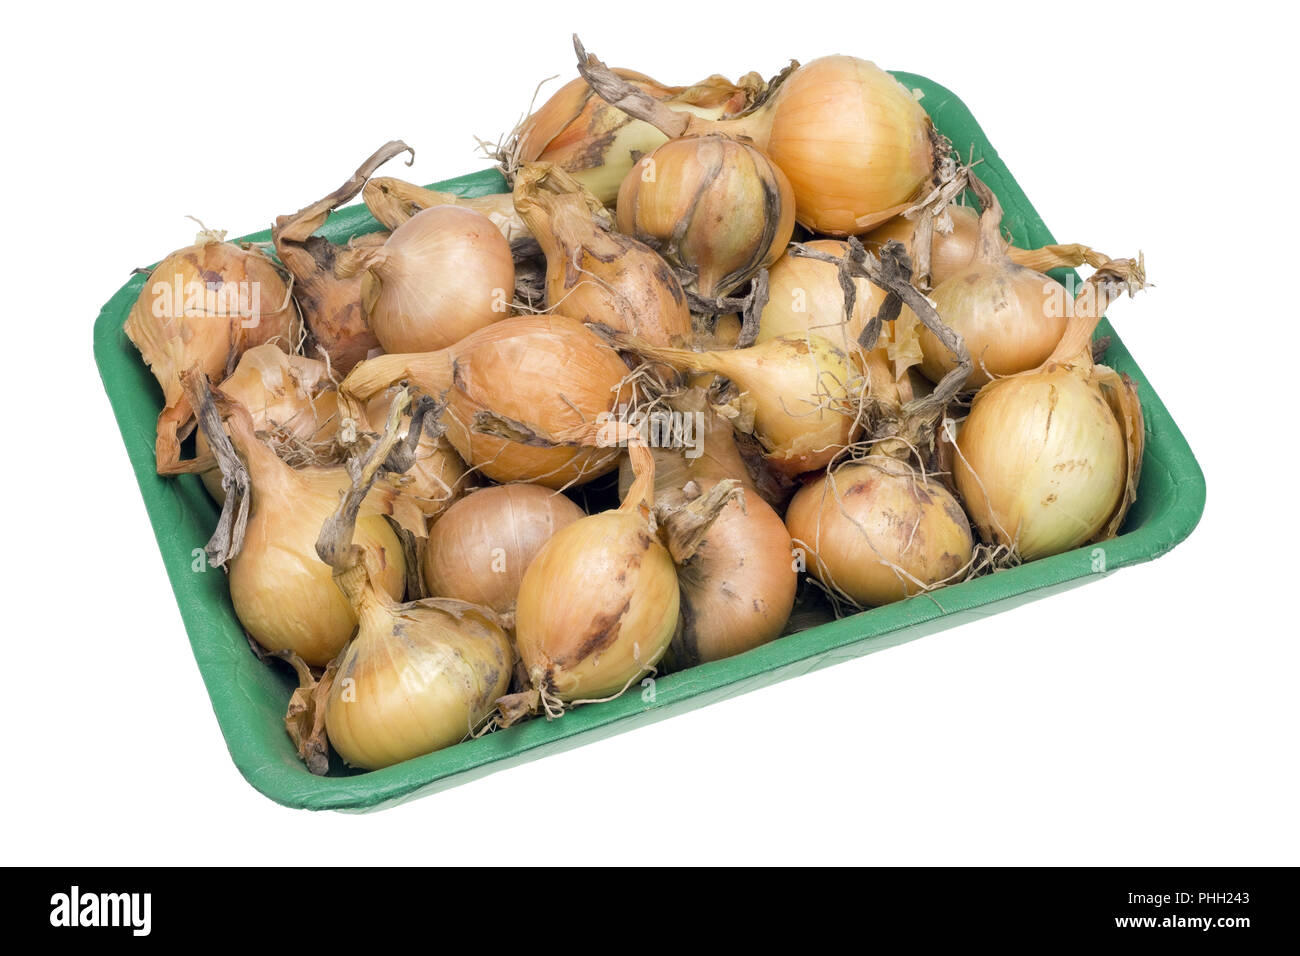 Small but tasty  onions Stock Photo